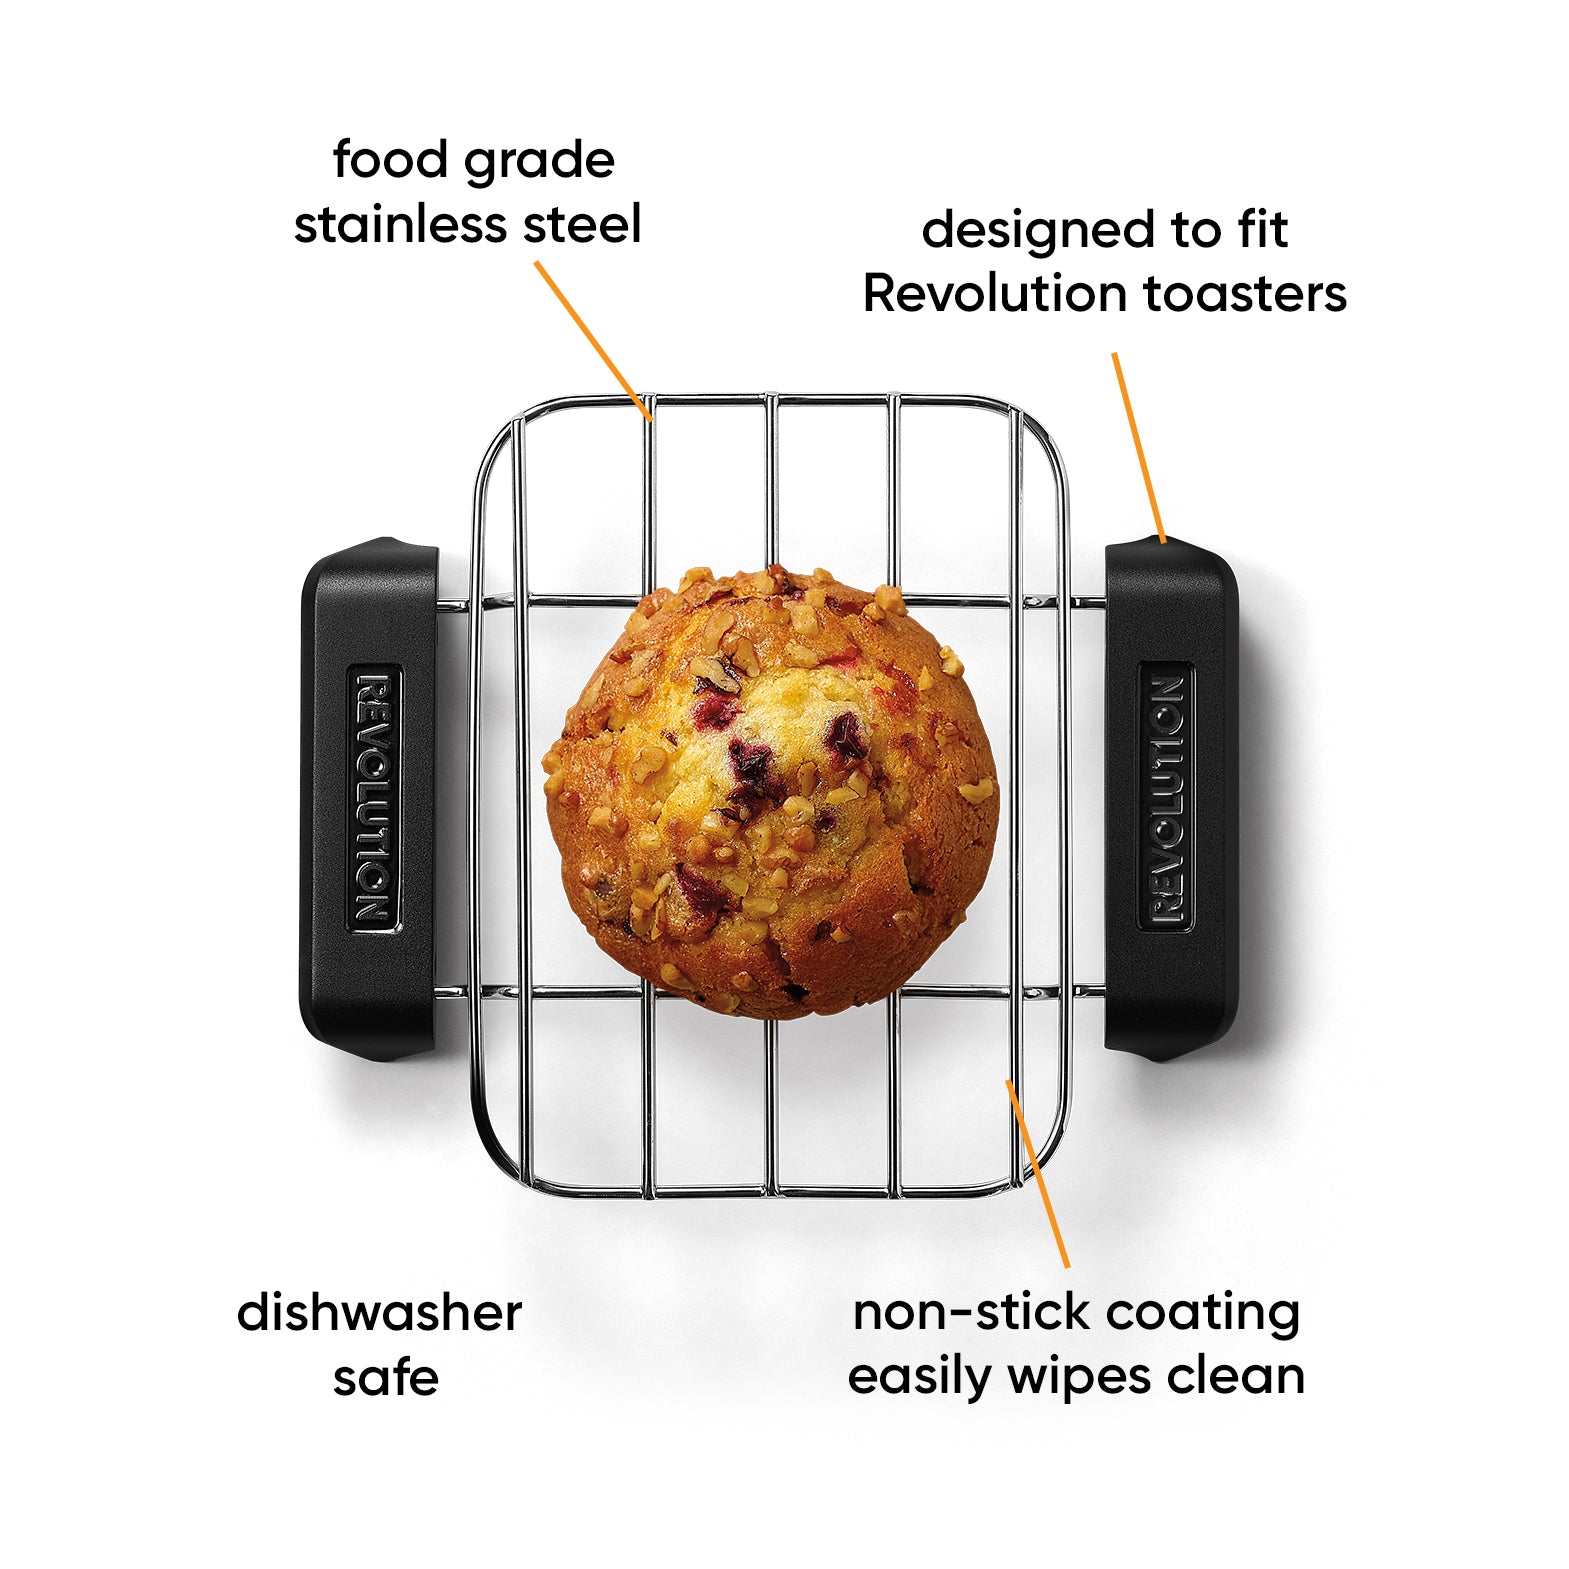 warming rack with muffin on white background. call outs of features. Text says "food grade stainless steel, designed to fit Revolution Toasters, dishwasher safe, non-stick coating easily wipes clean"